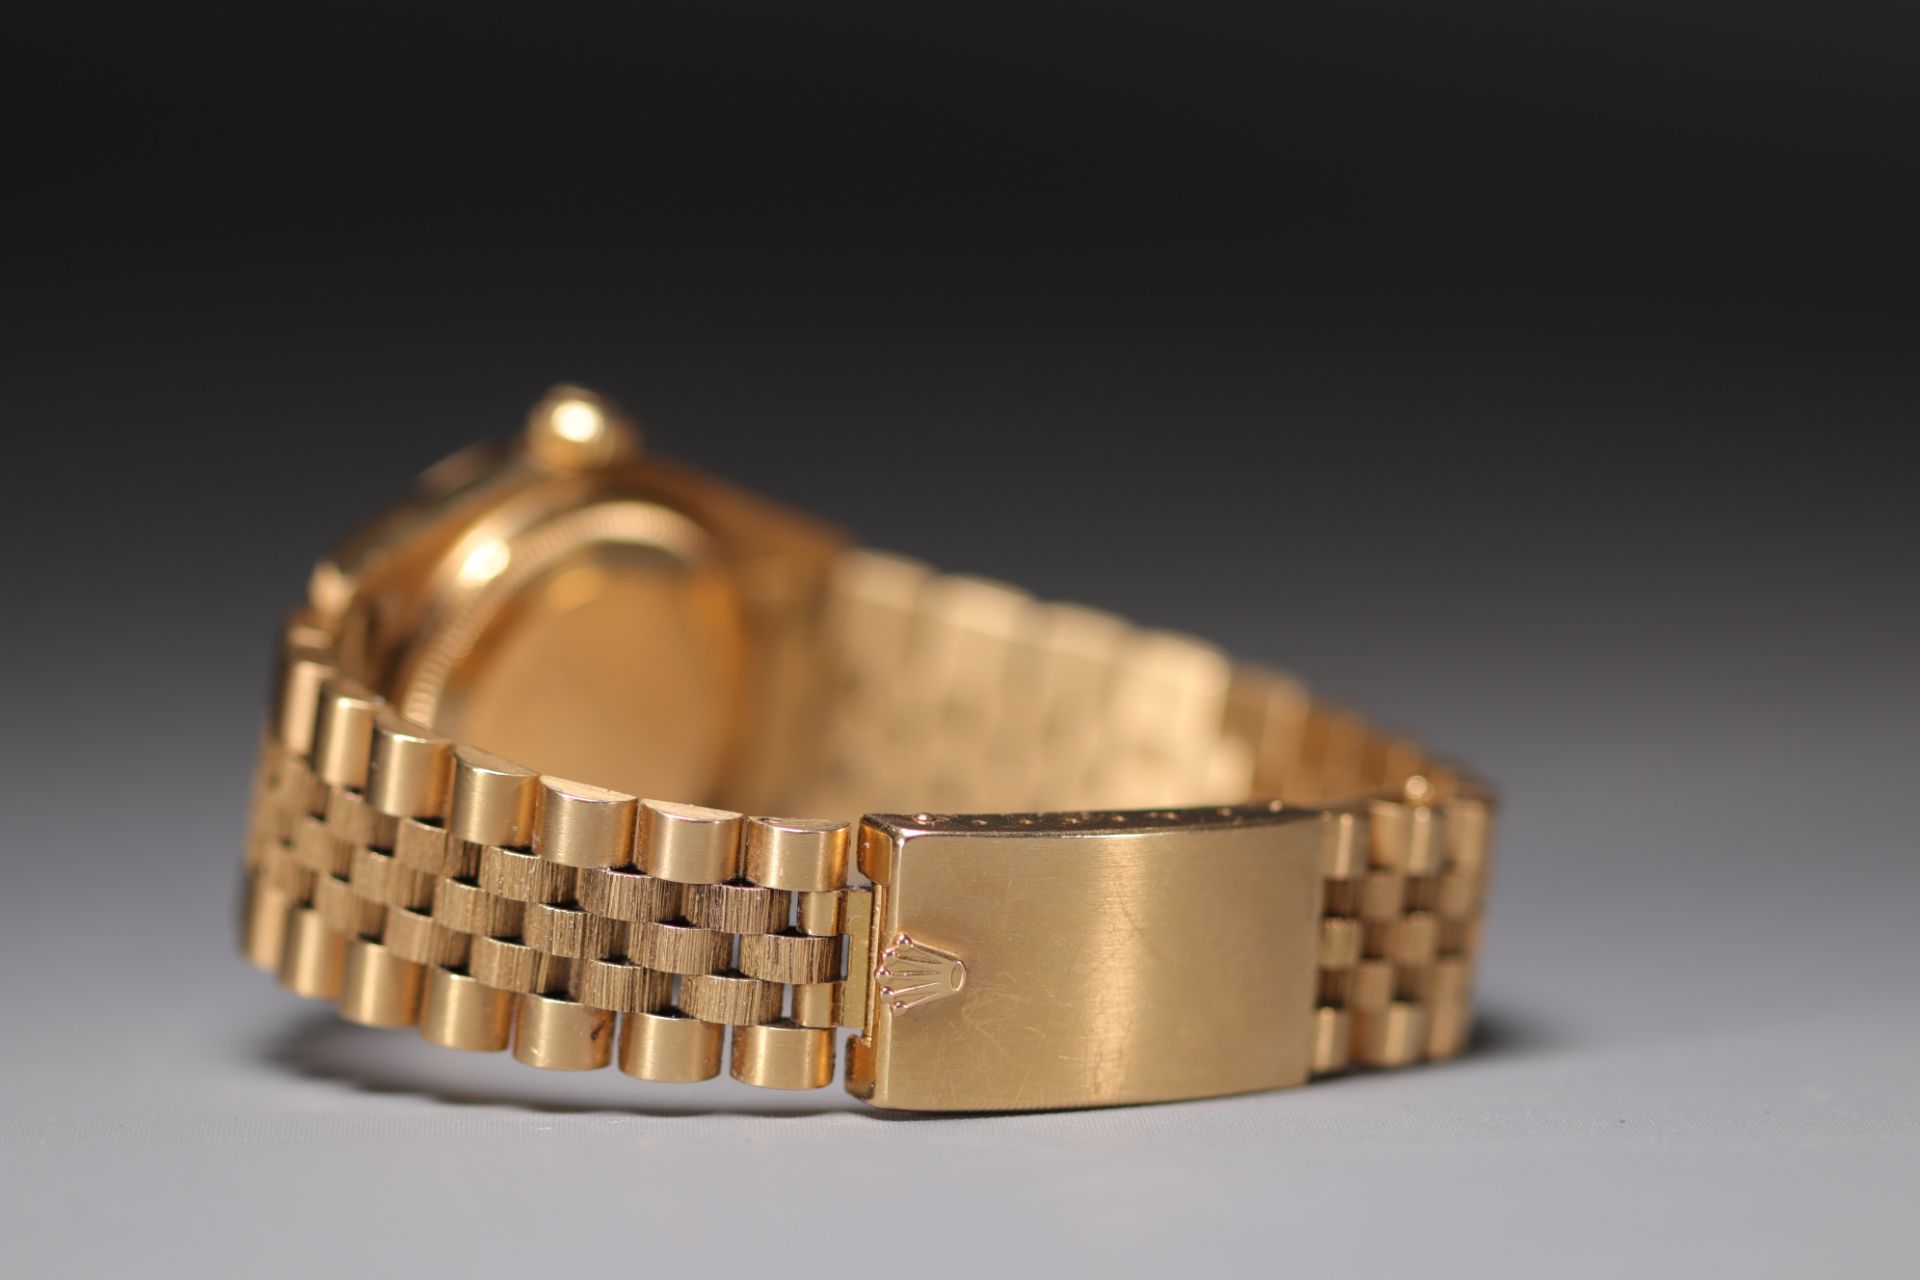 Rolex Oyster Perpetual Datejust (16078) in 18k yellow gold, "Jubilee" bracelet, Full Set, year 1980. - Image 4 of 4